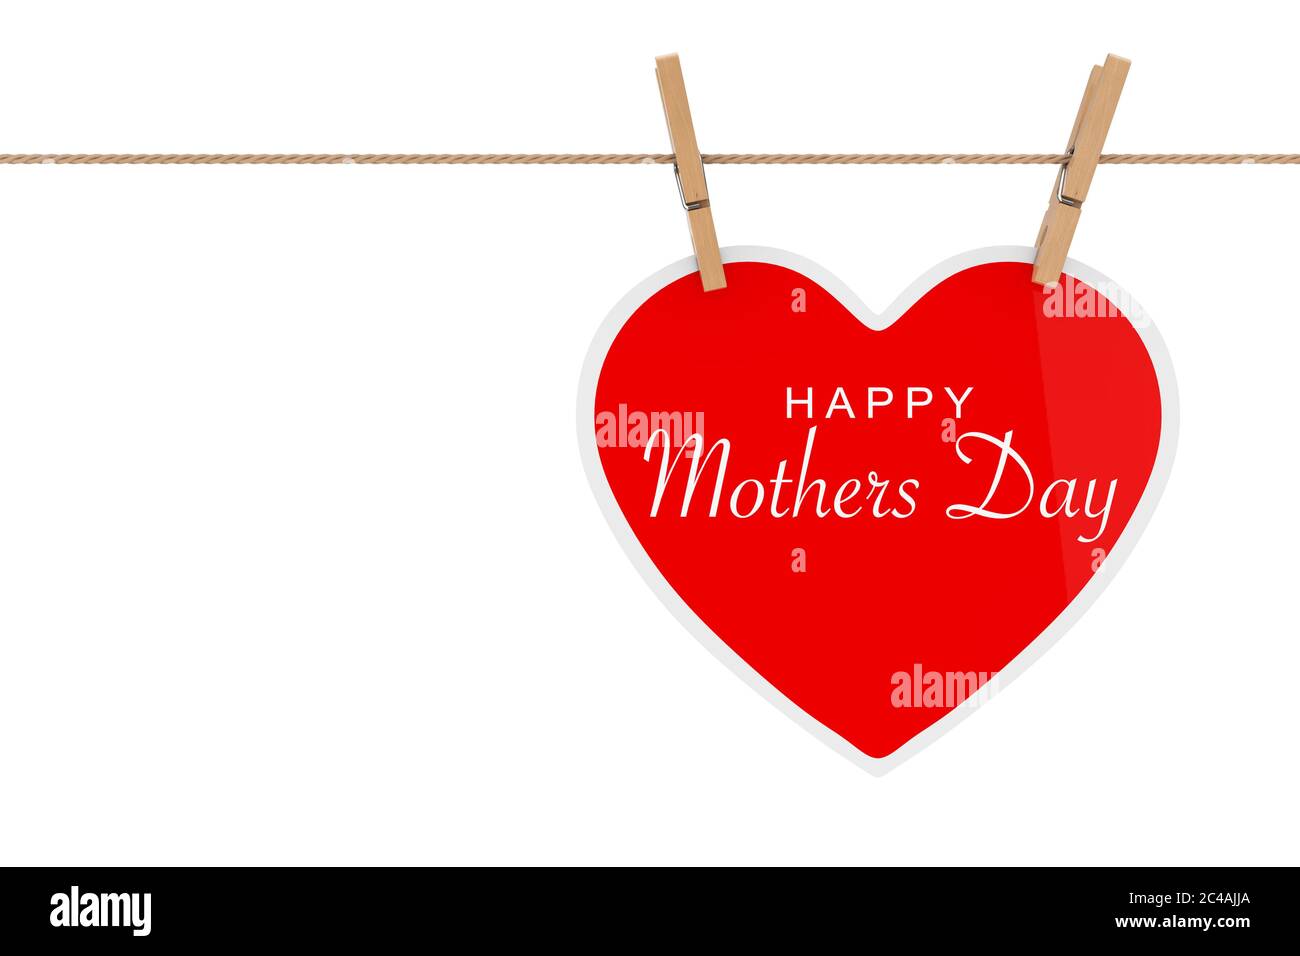 653,317 Mother's Day Images, Stock Photos, 3D objects, & Vectors